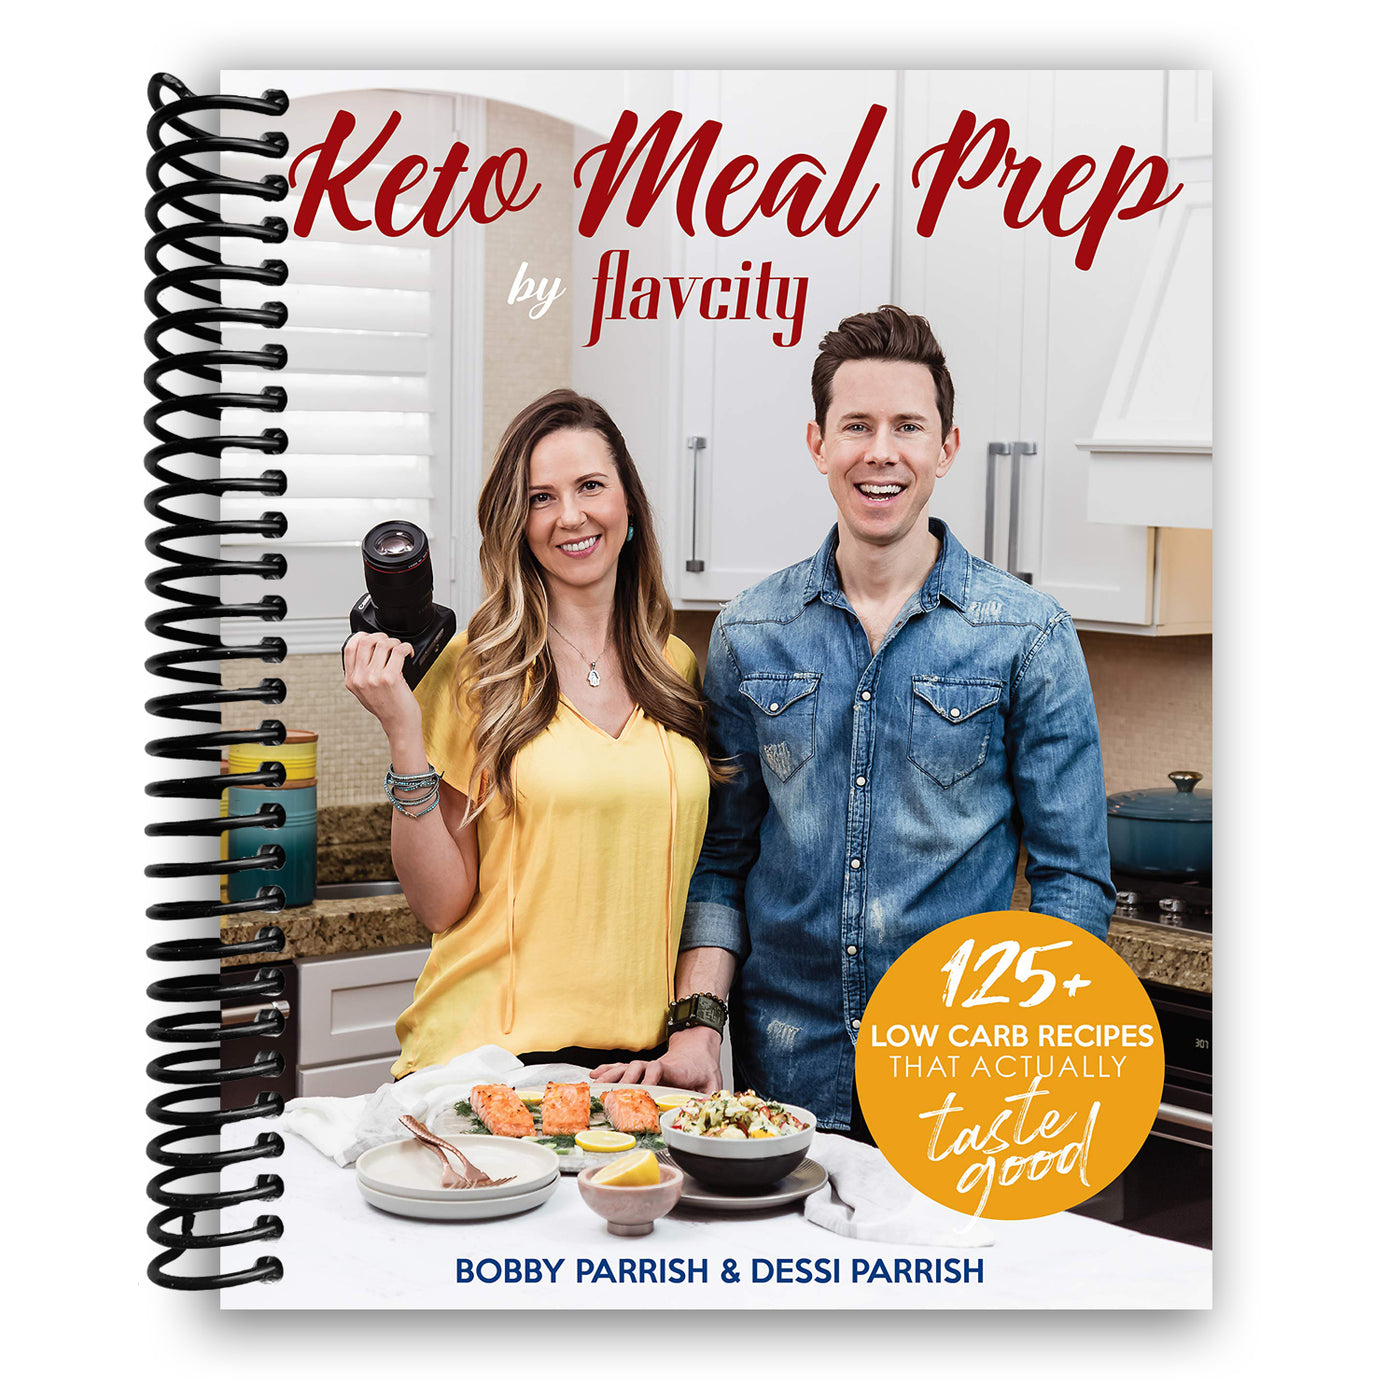 Keto Meal Prep by FlavCity: 125+ Low Carb Recipes That Actually Taste Good (Spiral Bound)